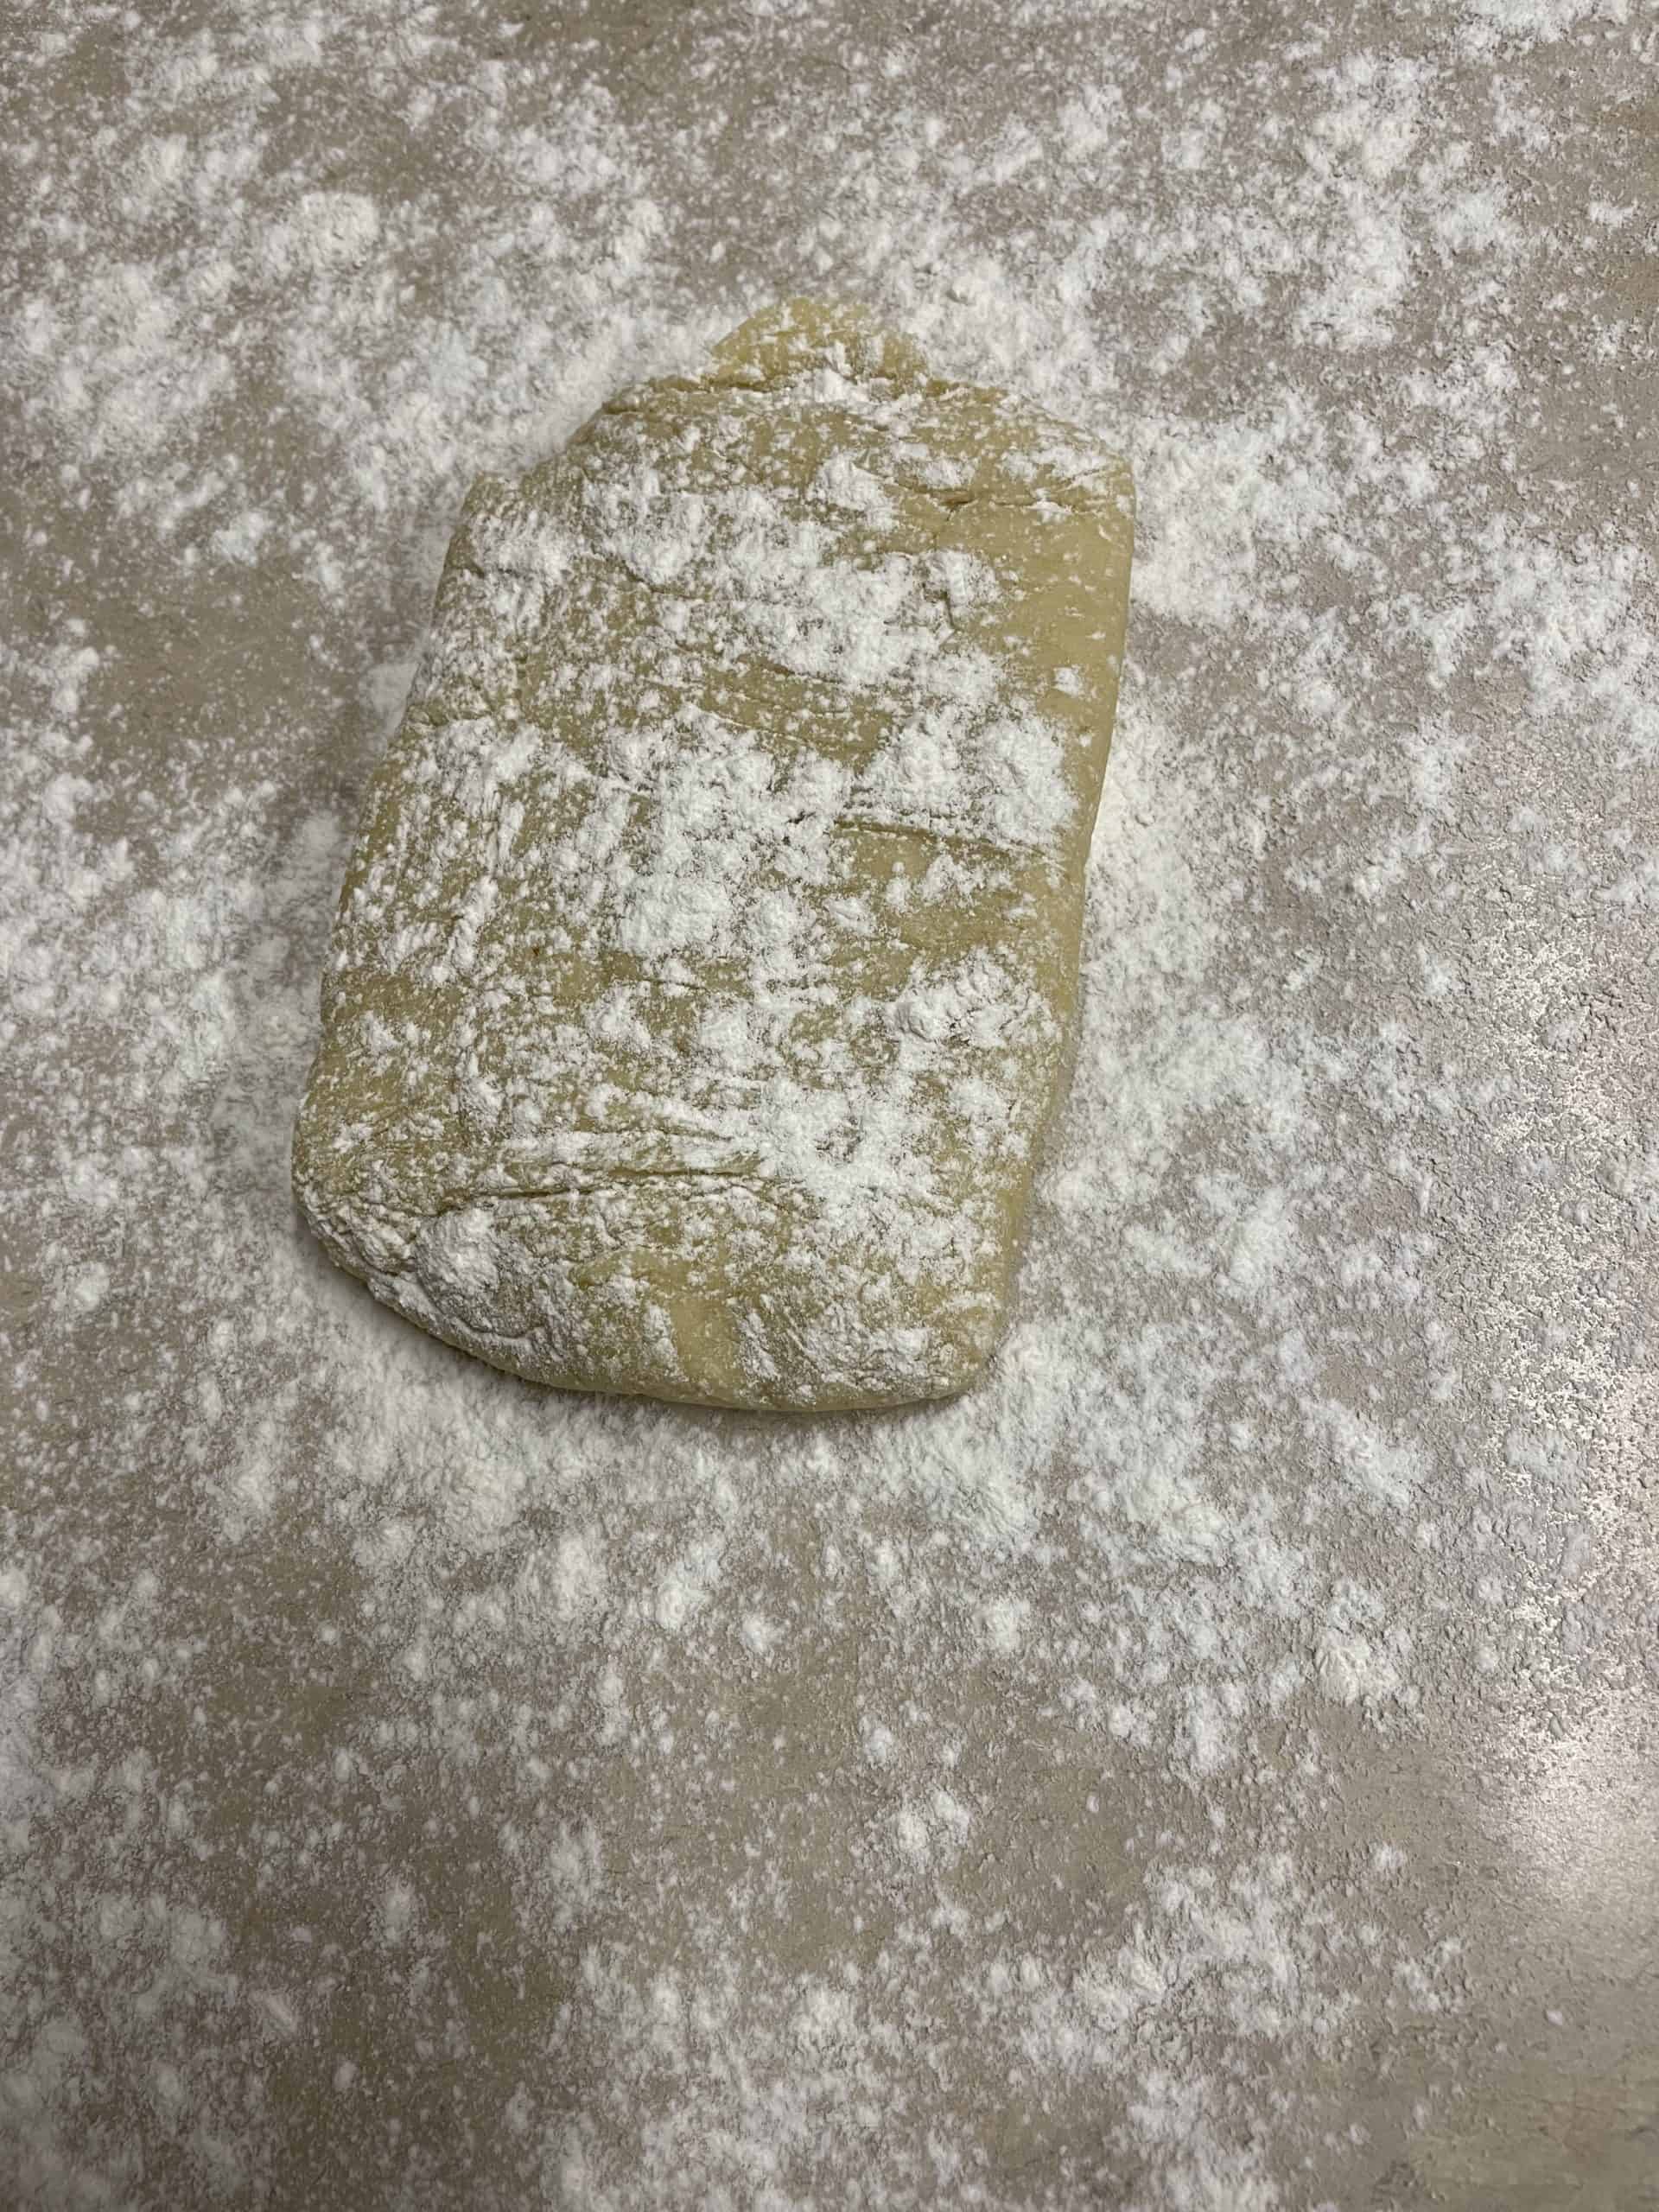 Floured sugar cookie dough and surface.